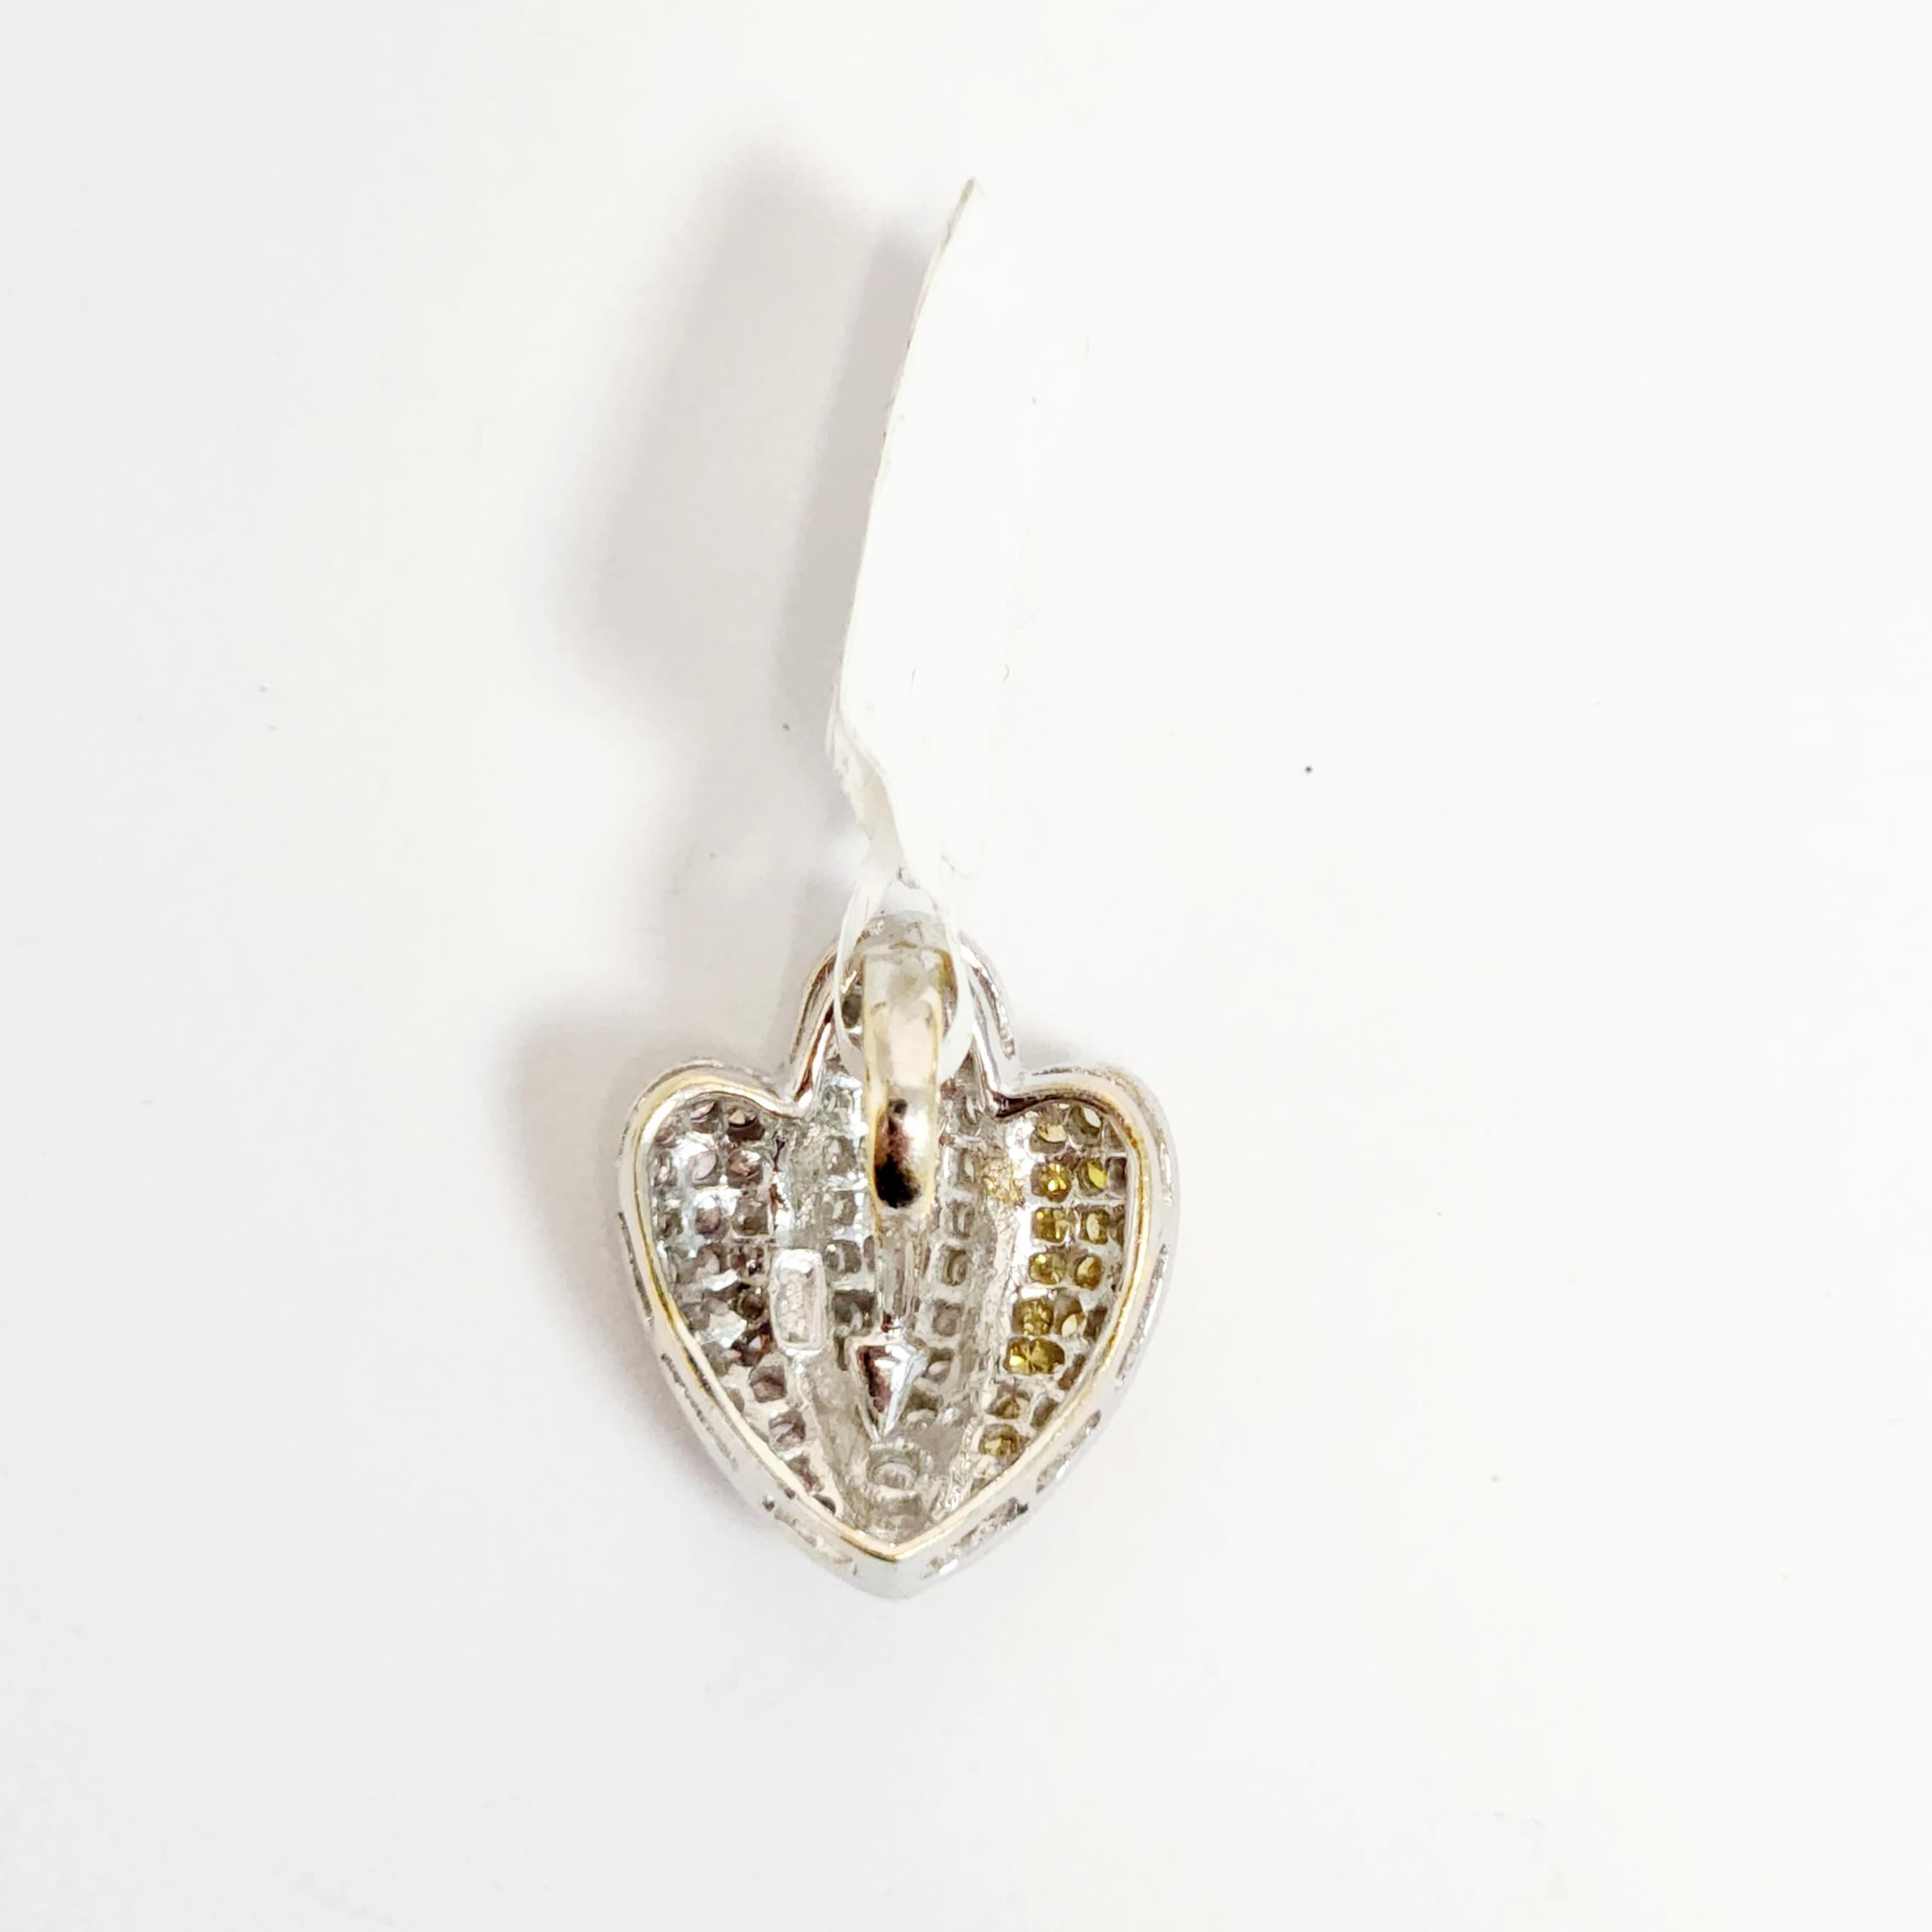 This exquisite pendant features a stunning tulip design, crafted from a combination of 18K yellow, white, and rose gold. The petals of the tulip are adorned with a dazzling array of white, yellow, and pink melee diamonds, creating a breathtaking